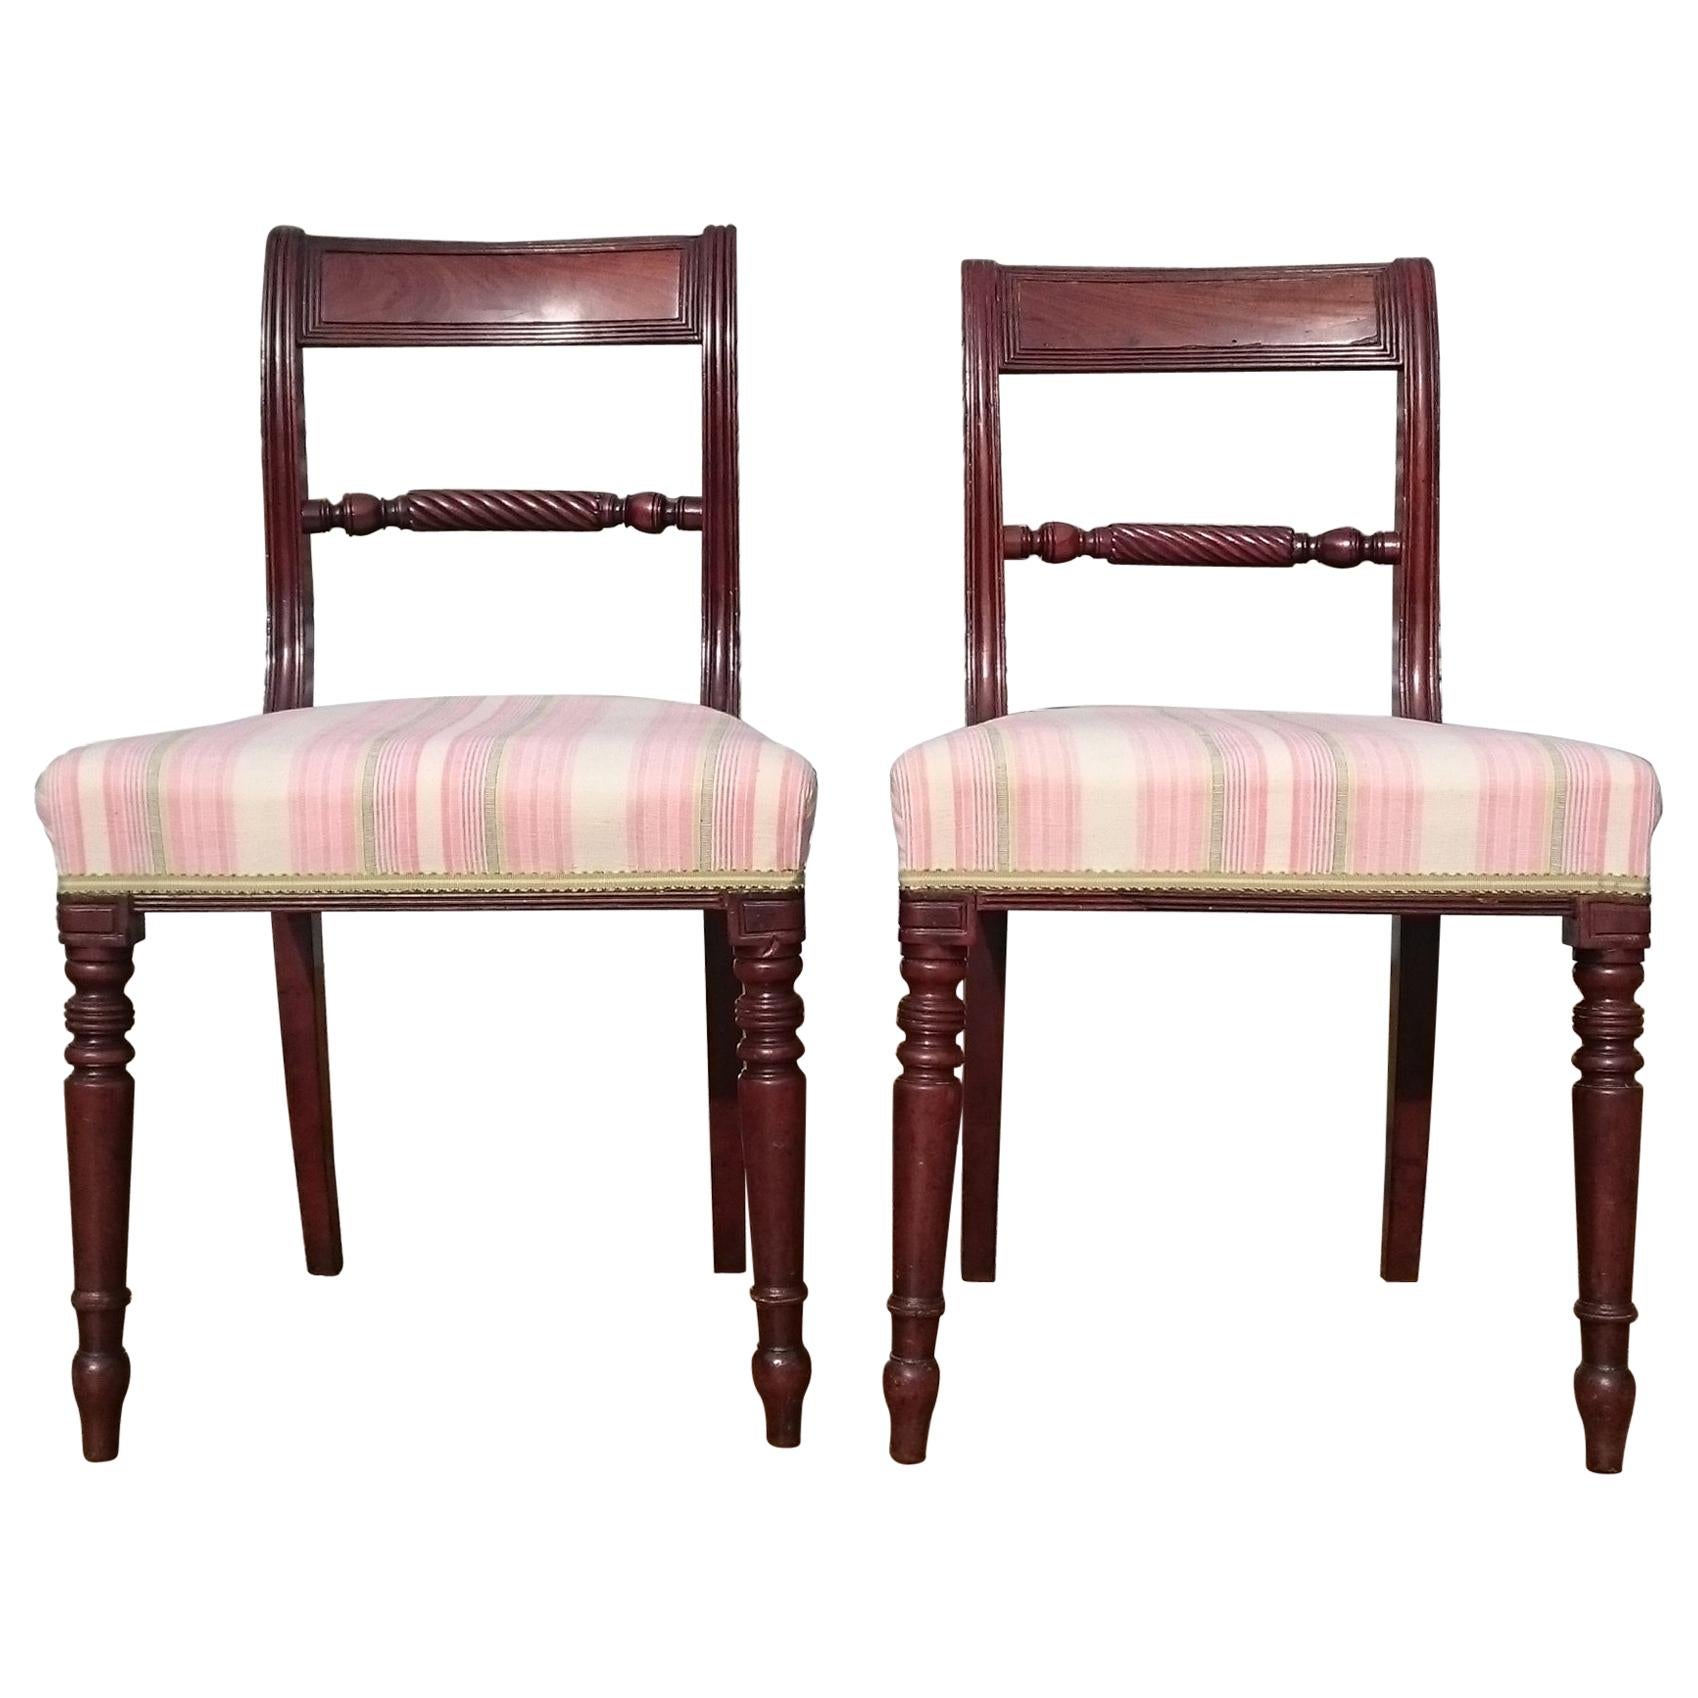 Pair of Early 19th Century Regency Mahogany Antique Dining Chairs